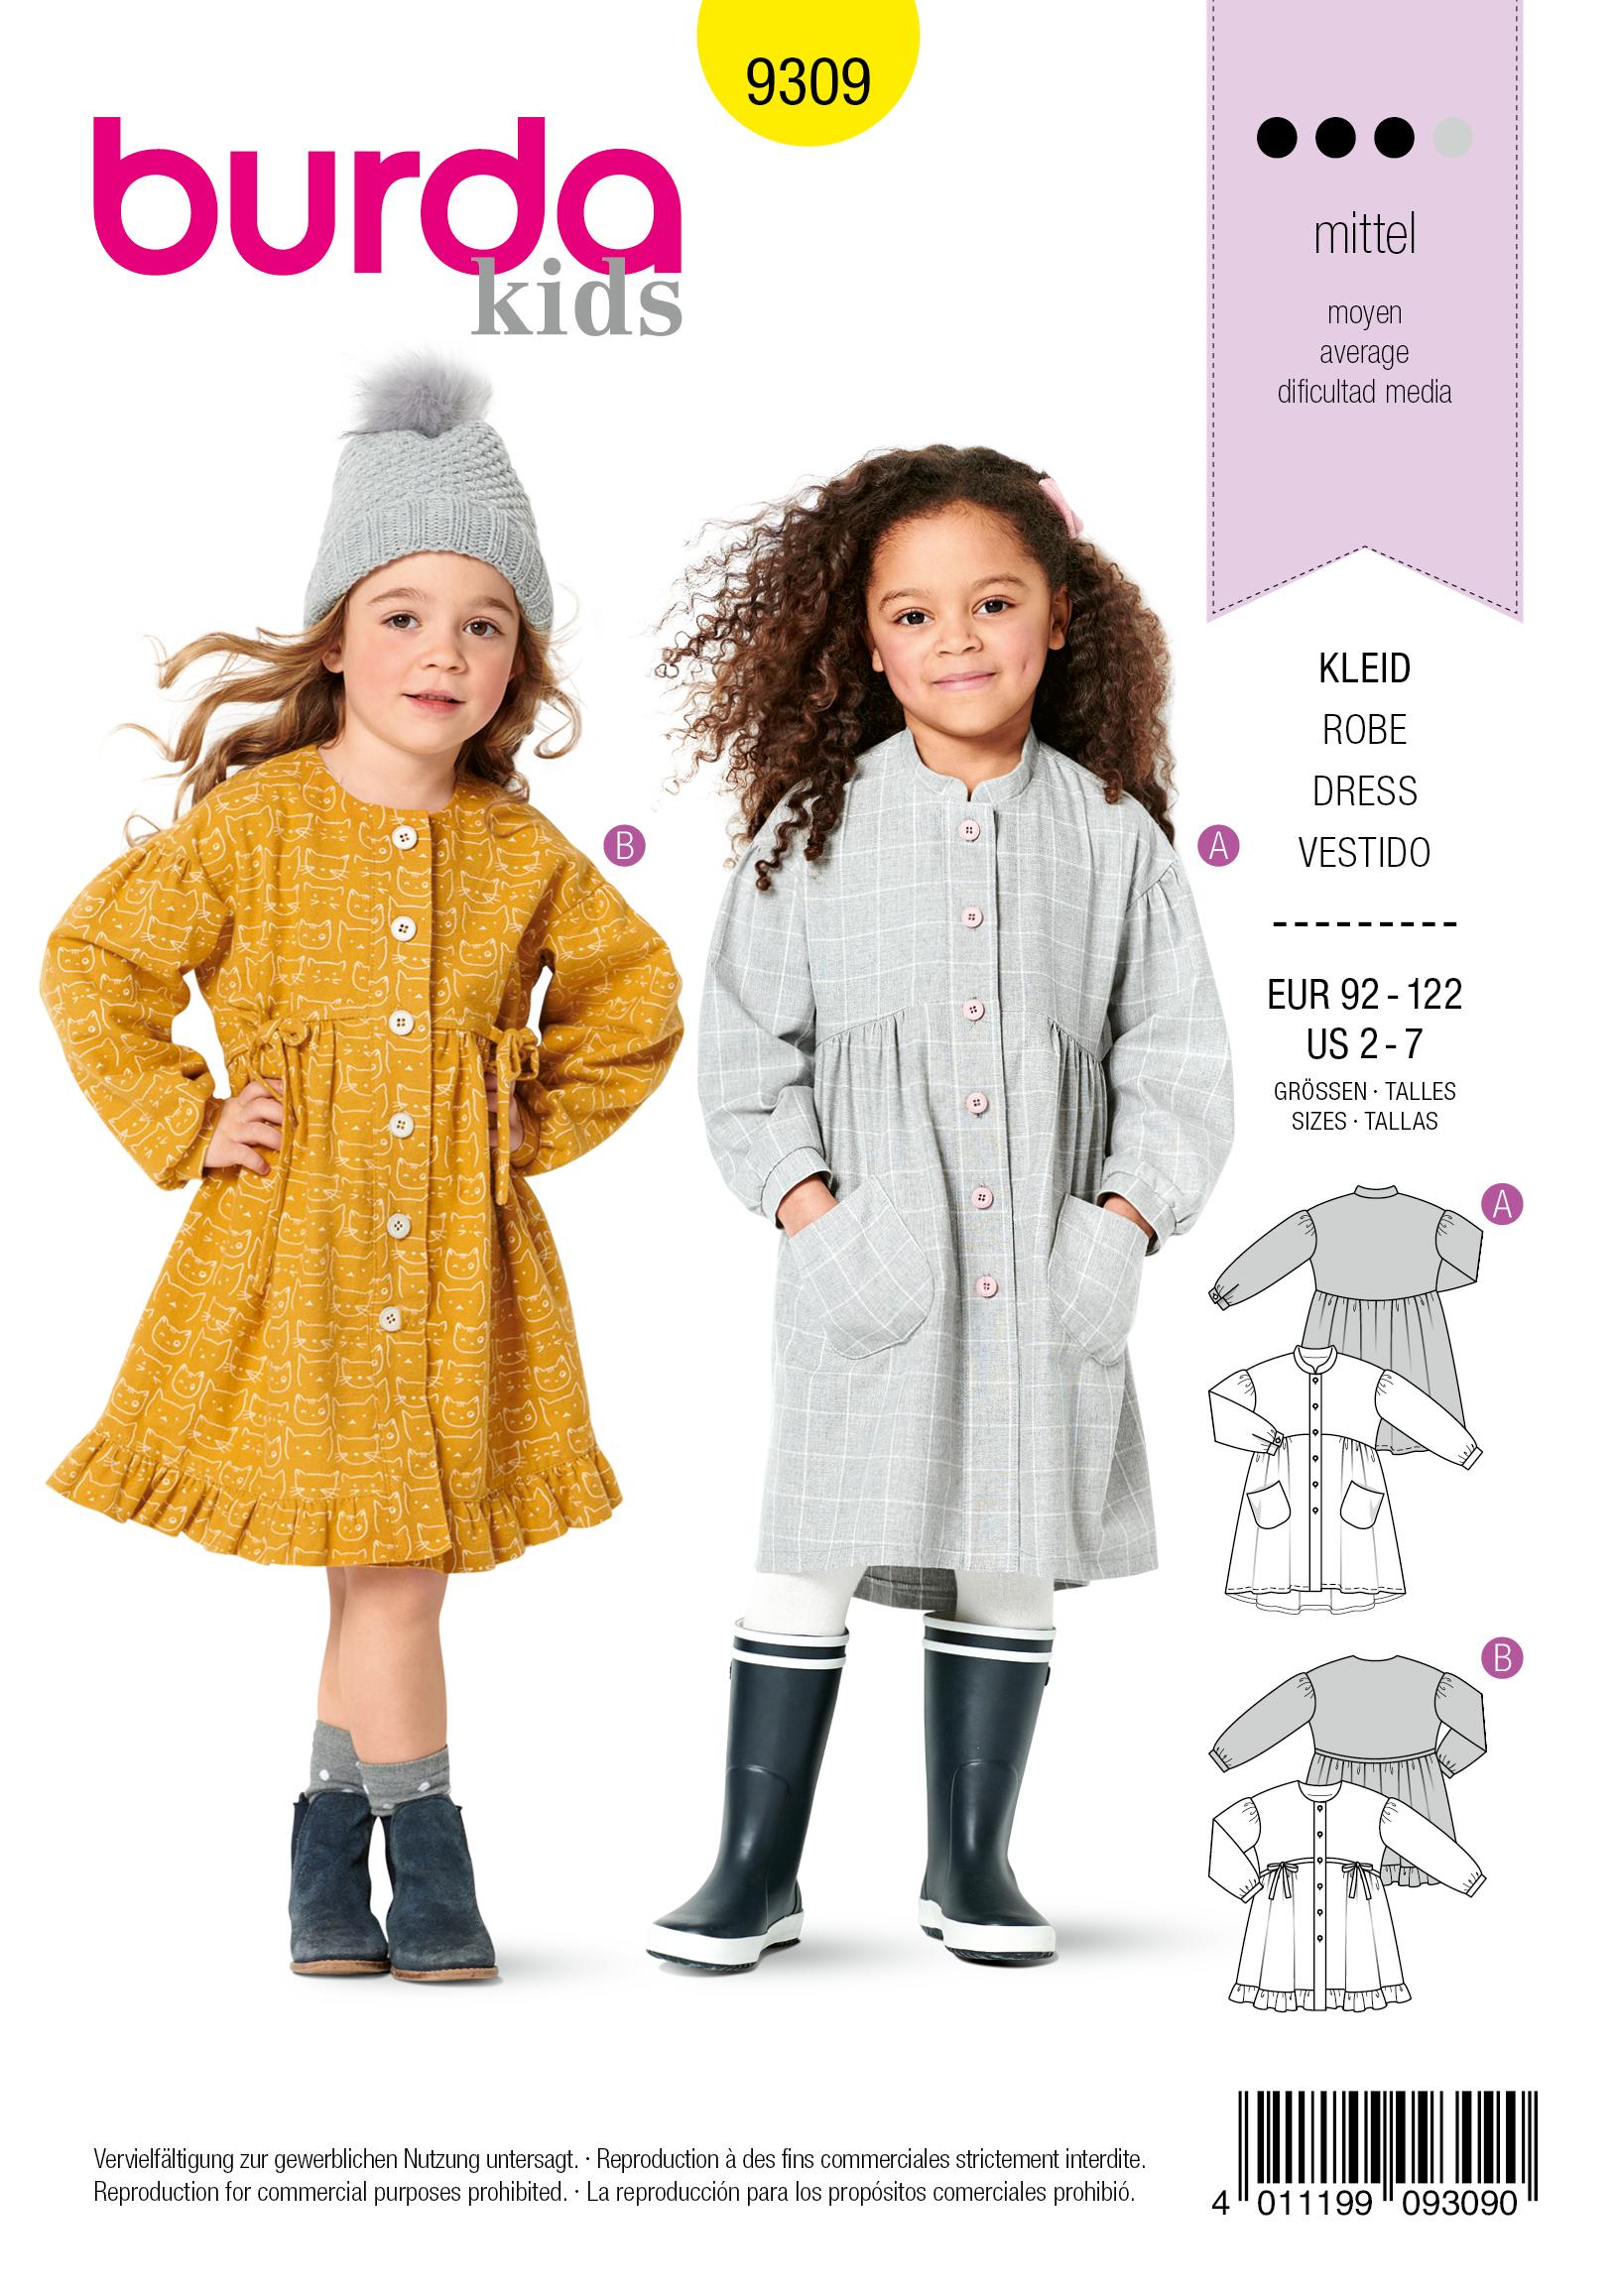 Burda 9309 Children's Dresses, Buttons at Front, with Trim and Pocket Variations